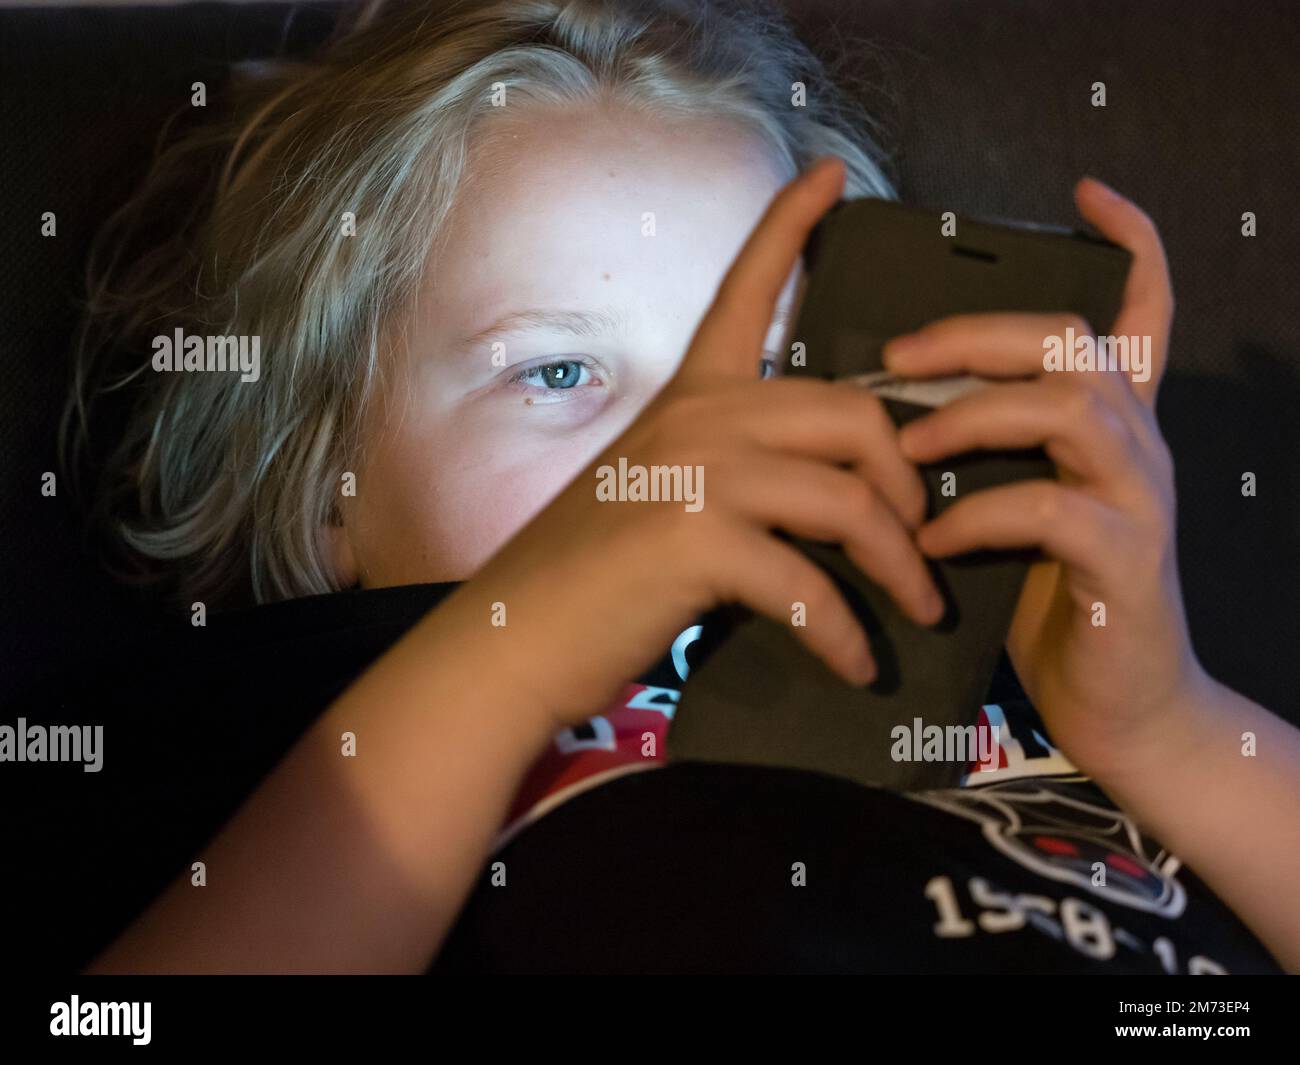 A teenage boy is lying in bed holding his smartphone before falling asleep. Smartphone display is illuminating boy's face. Caucasian ethnicity. Stock Photo